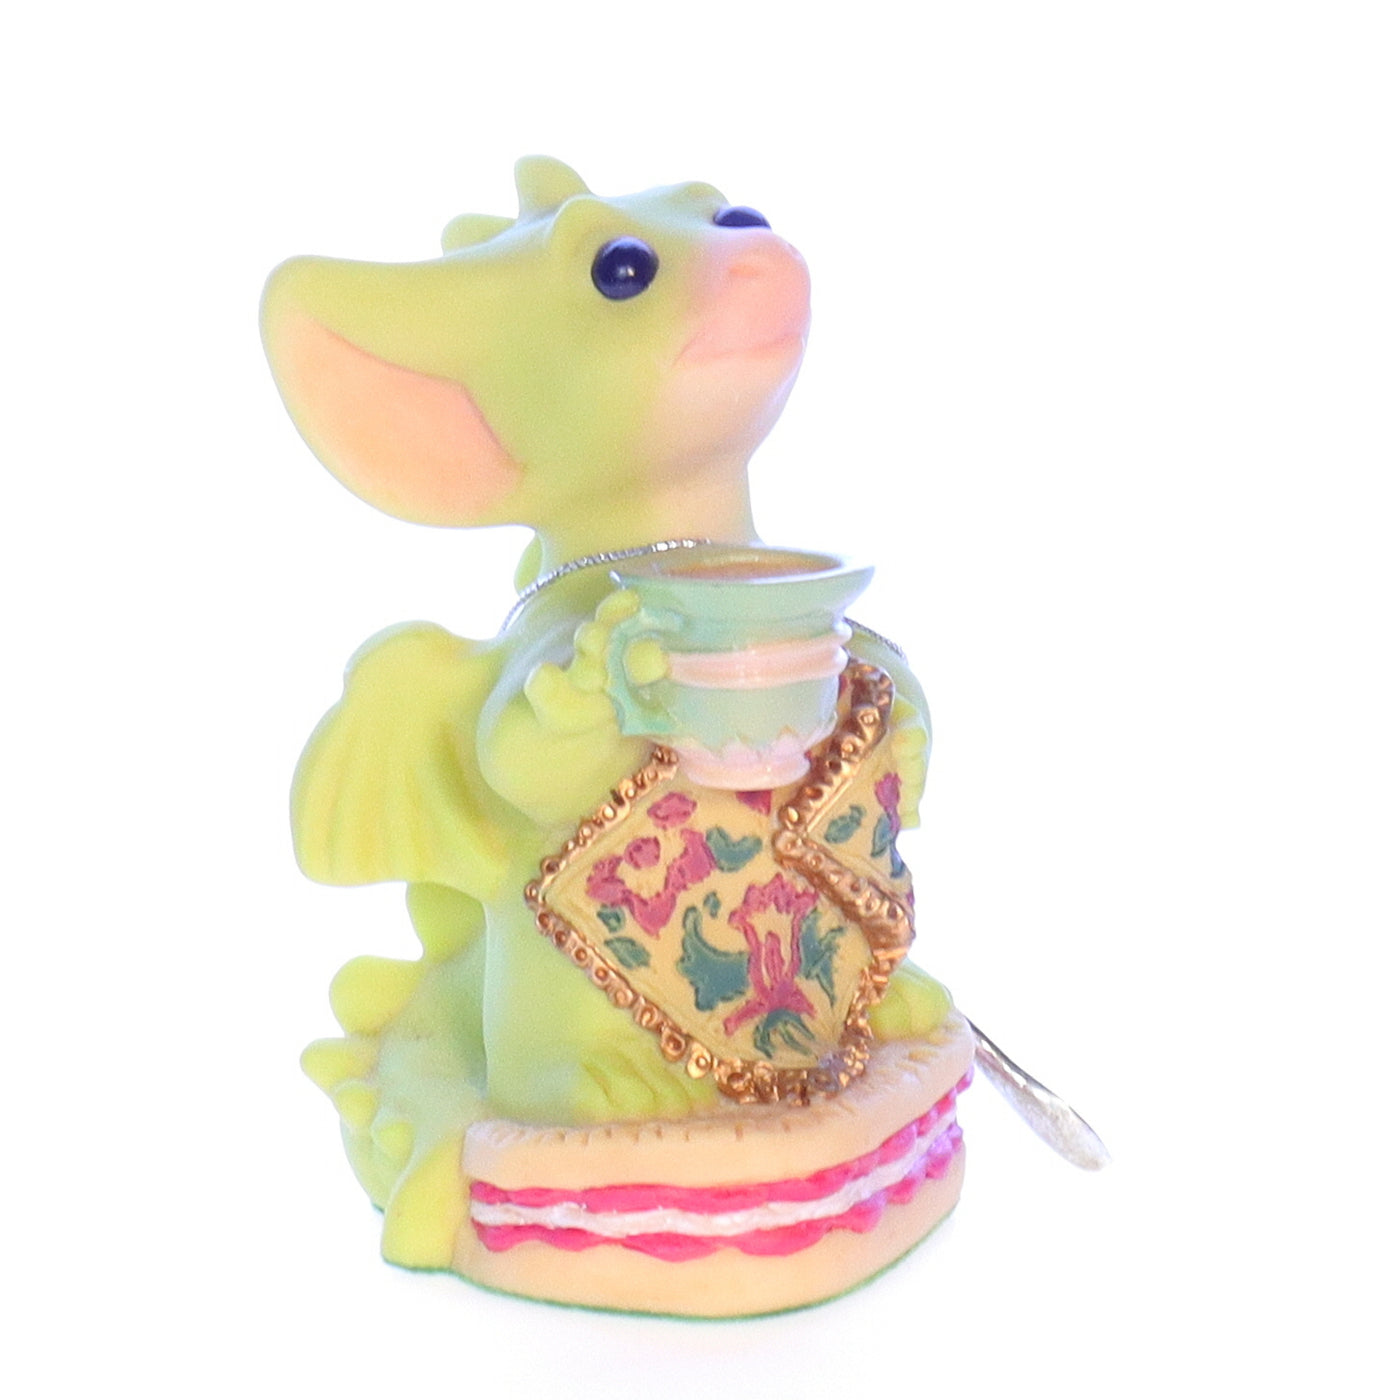 Whimsical_World_of_Pocket_Dragons_002798_Time_For_Tea_Tea_Figurine_2000_Box Front Right View